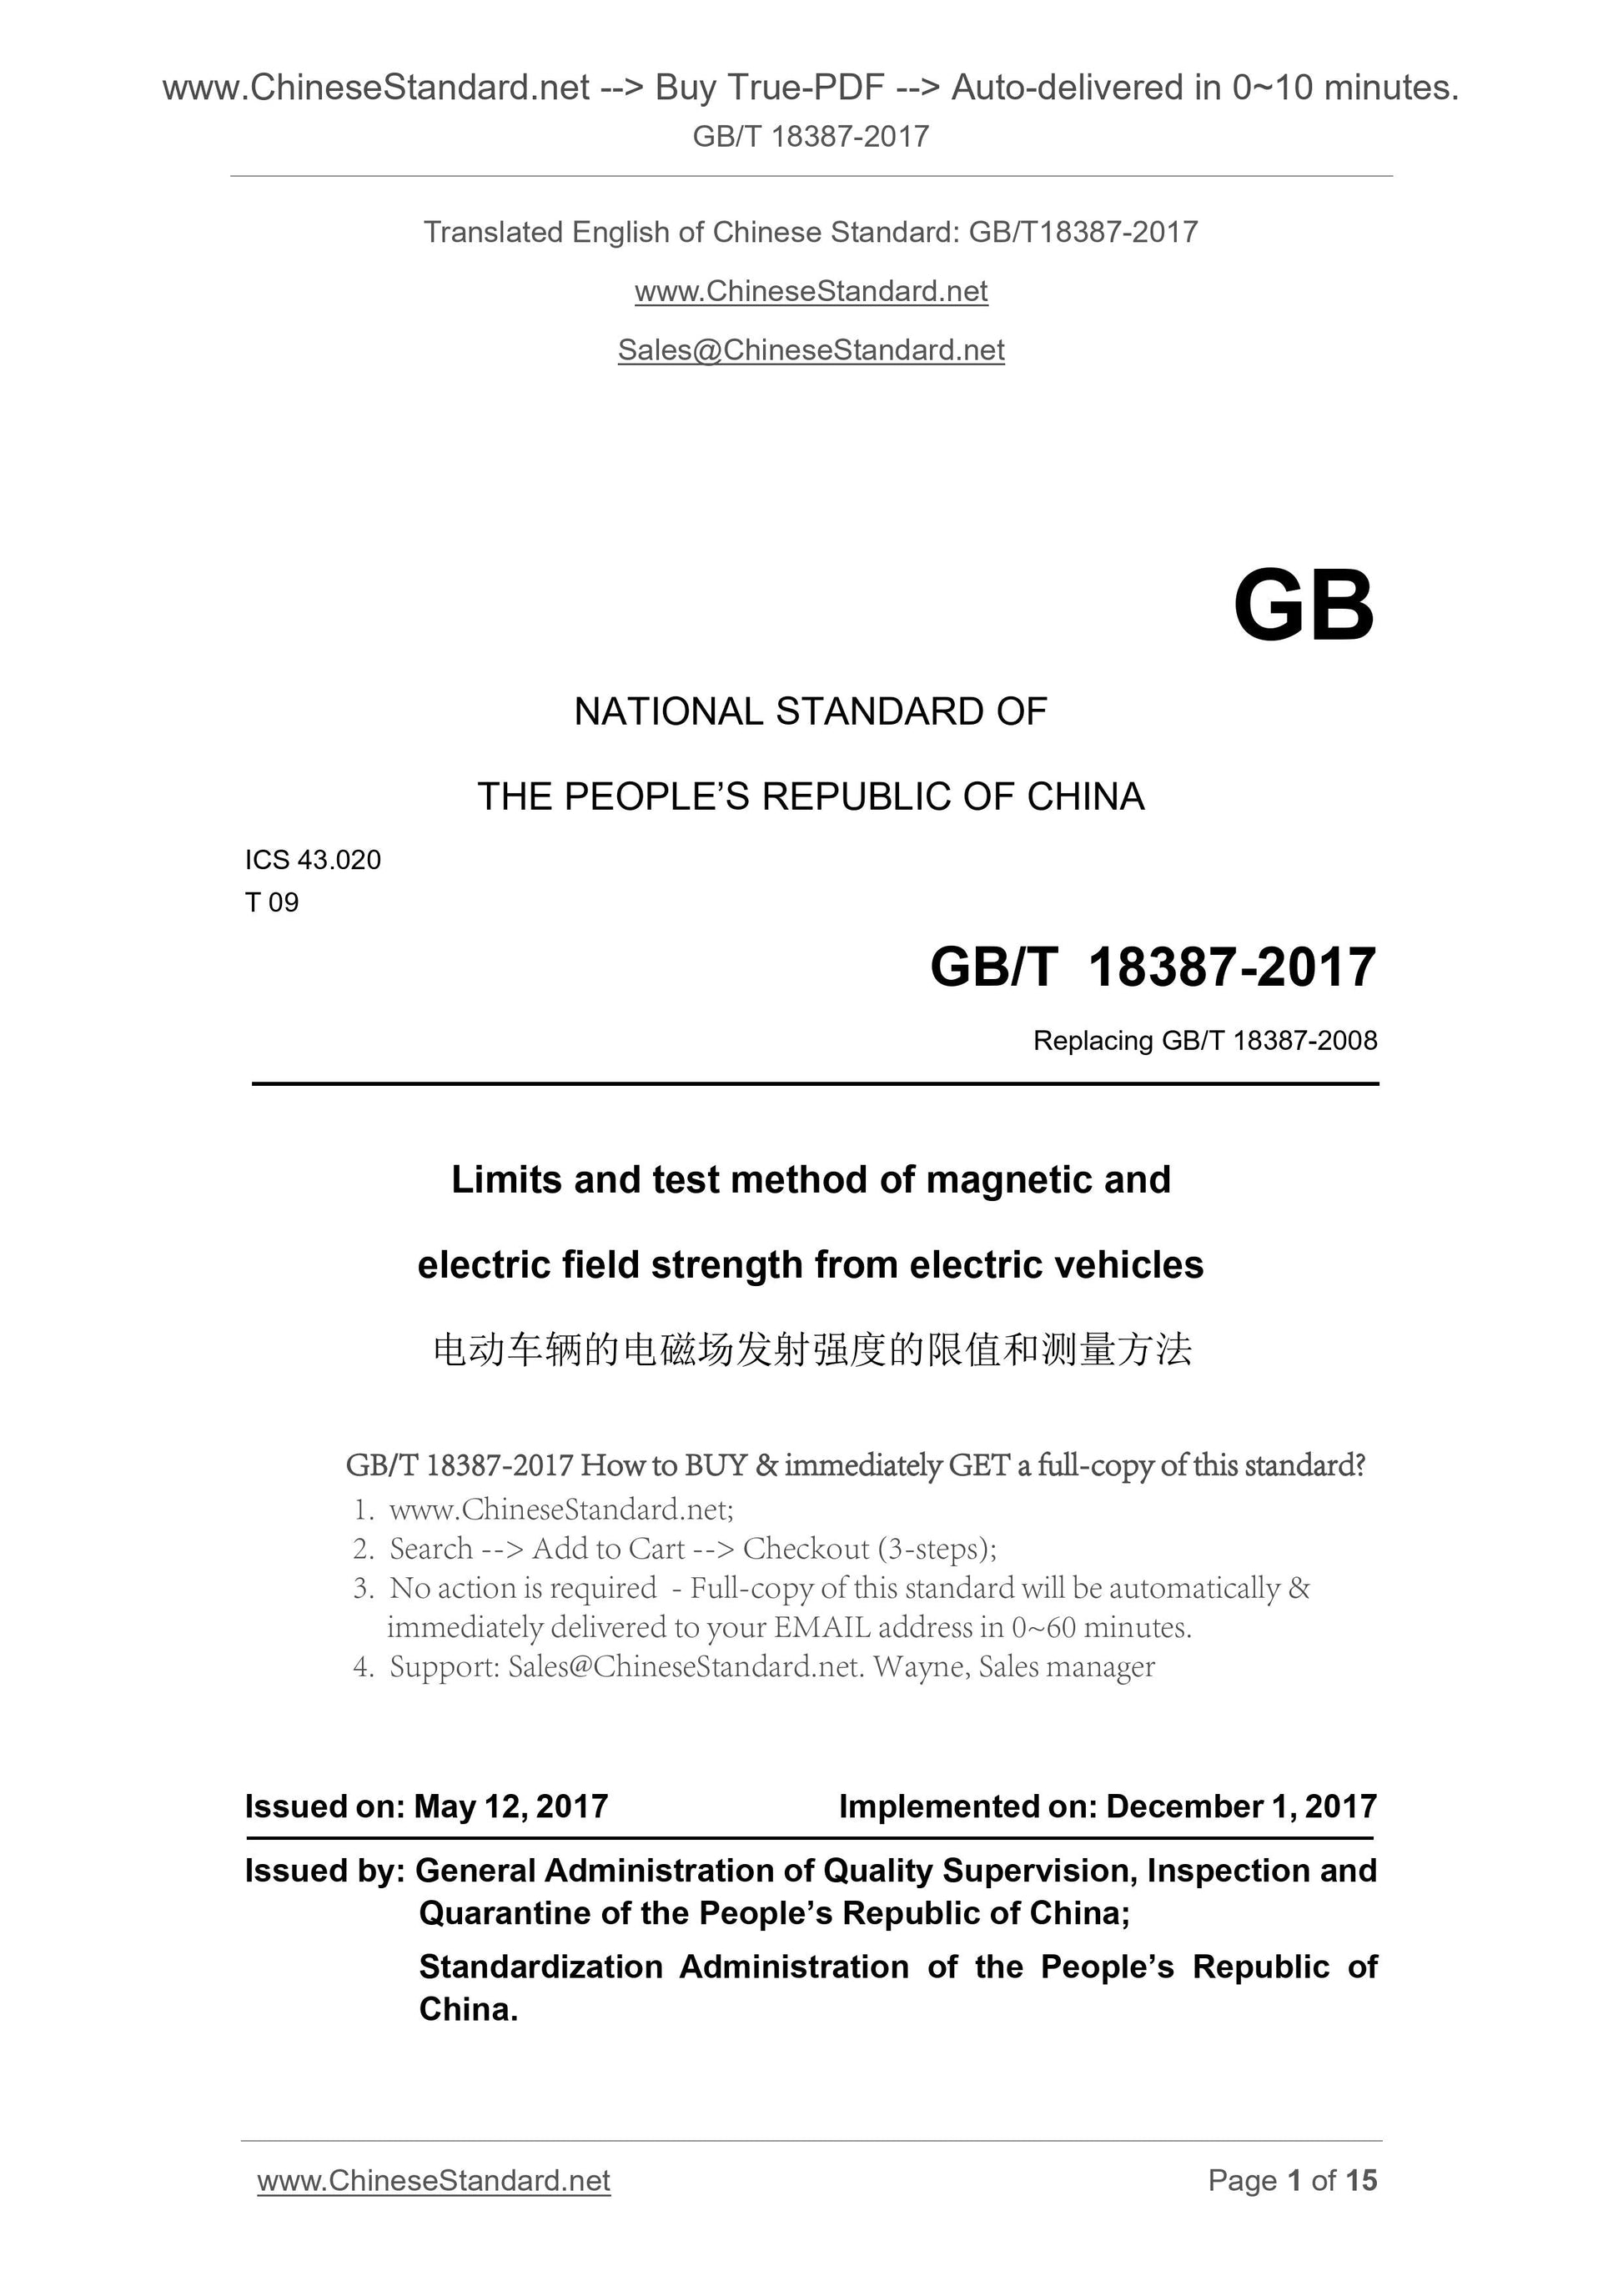 GB/T 18387-2017 Page 1